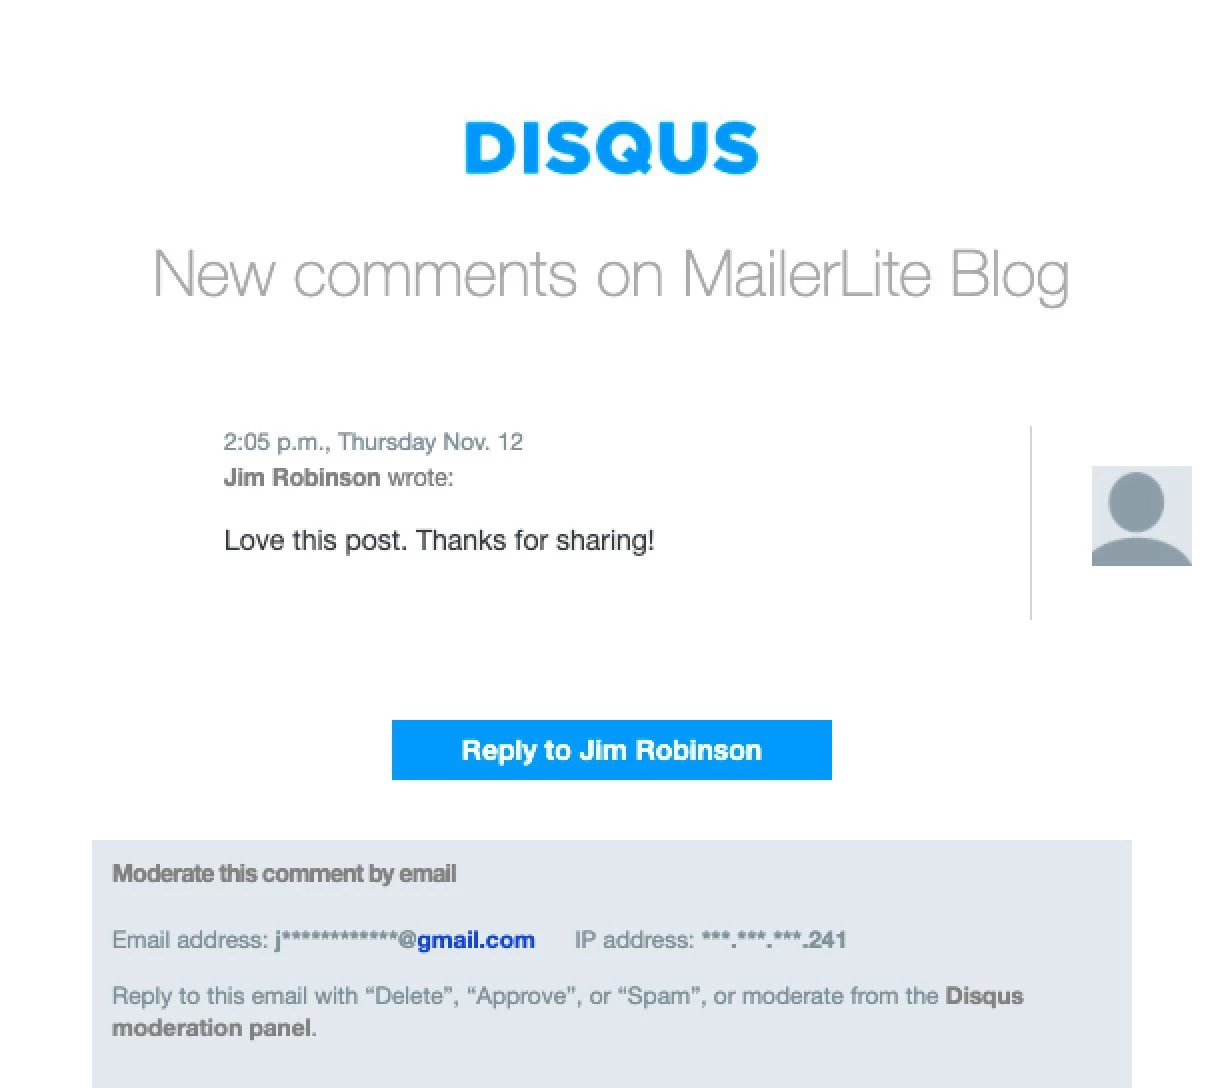 transactional email example: disqus notification of new comment in blog via transactional email